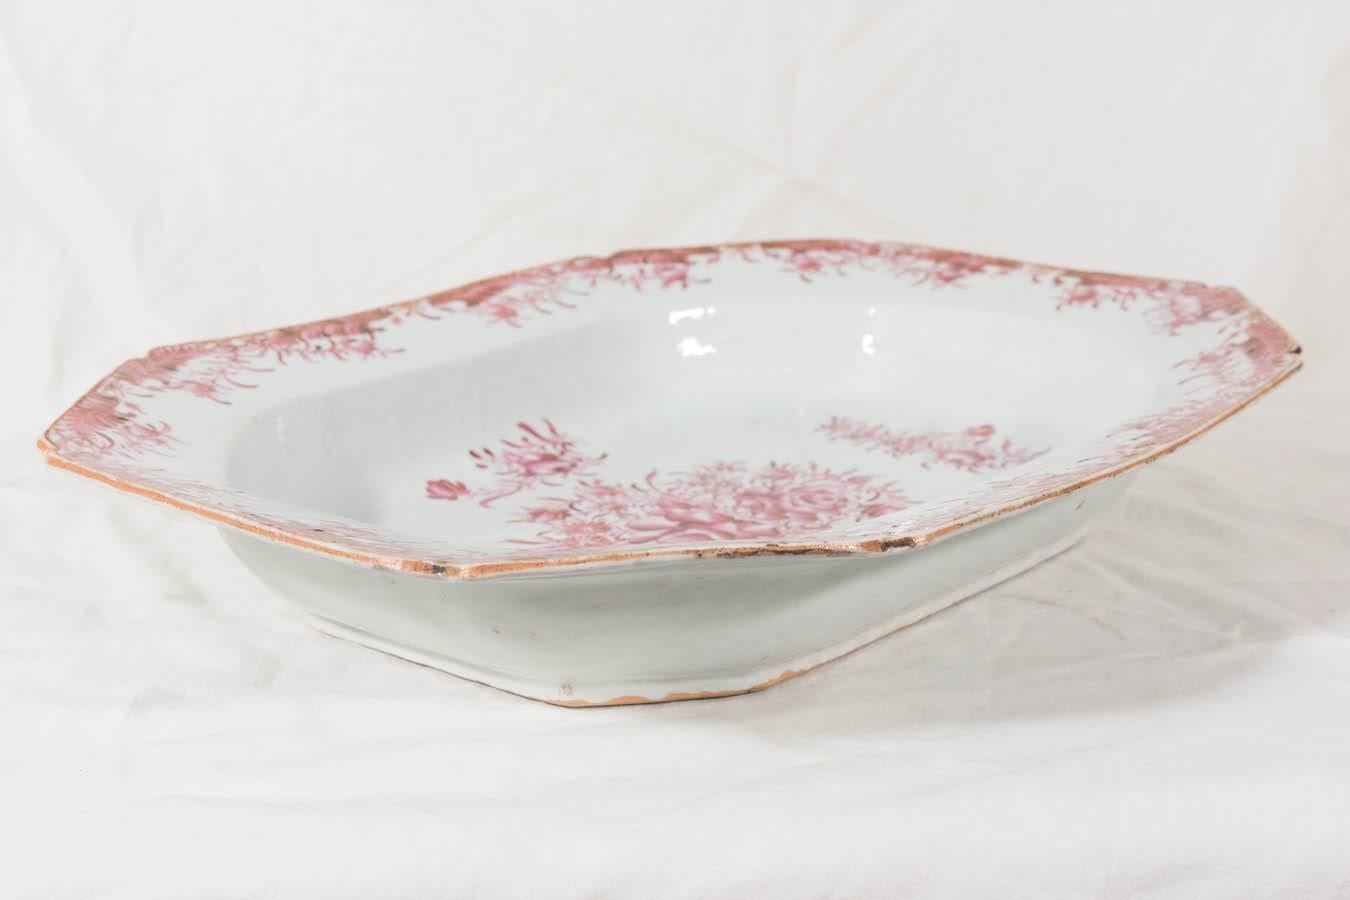 18th Century Antique Chinese Porcelain Platter Hand-Painted with Rose Pink Enamels